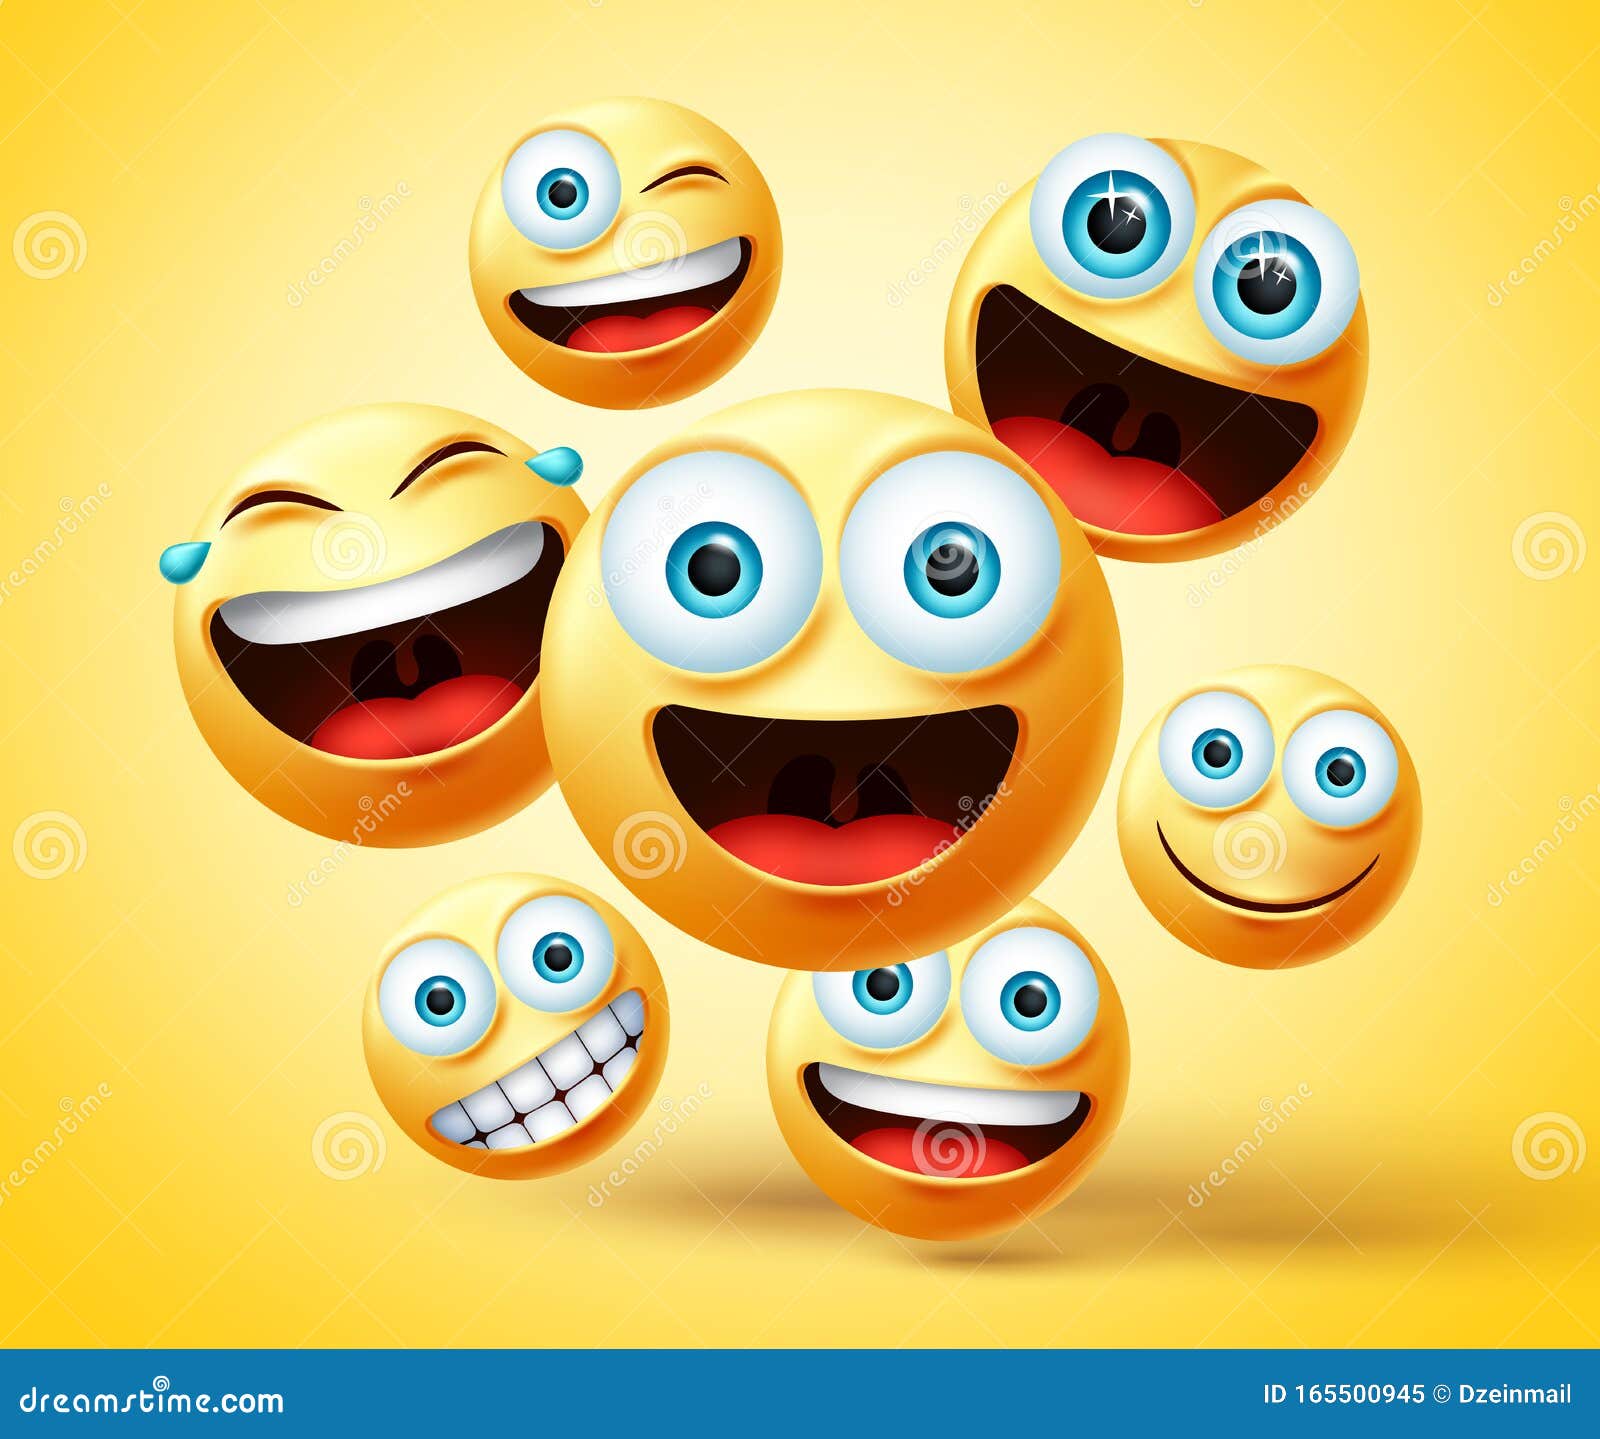 Smiley Emoticon And Emoji Group Vector Design Smileys Emoticons Cute Face Head Group Stock Vector Illustration Of Emotional Character